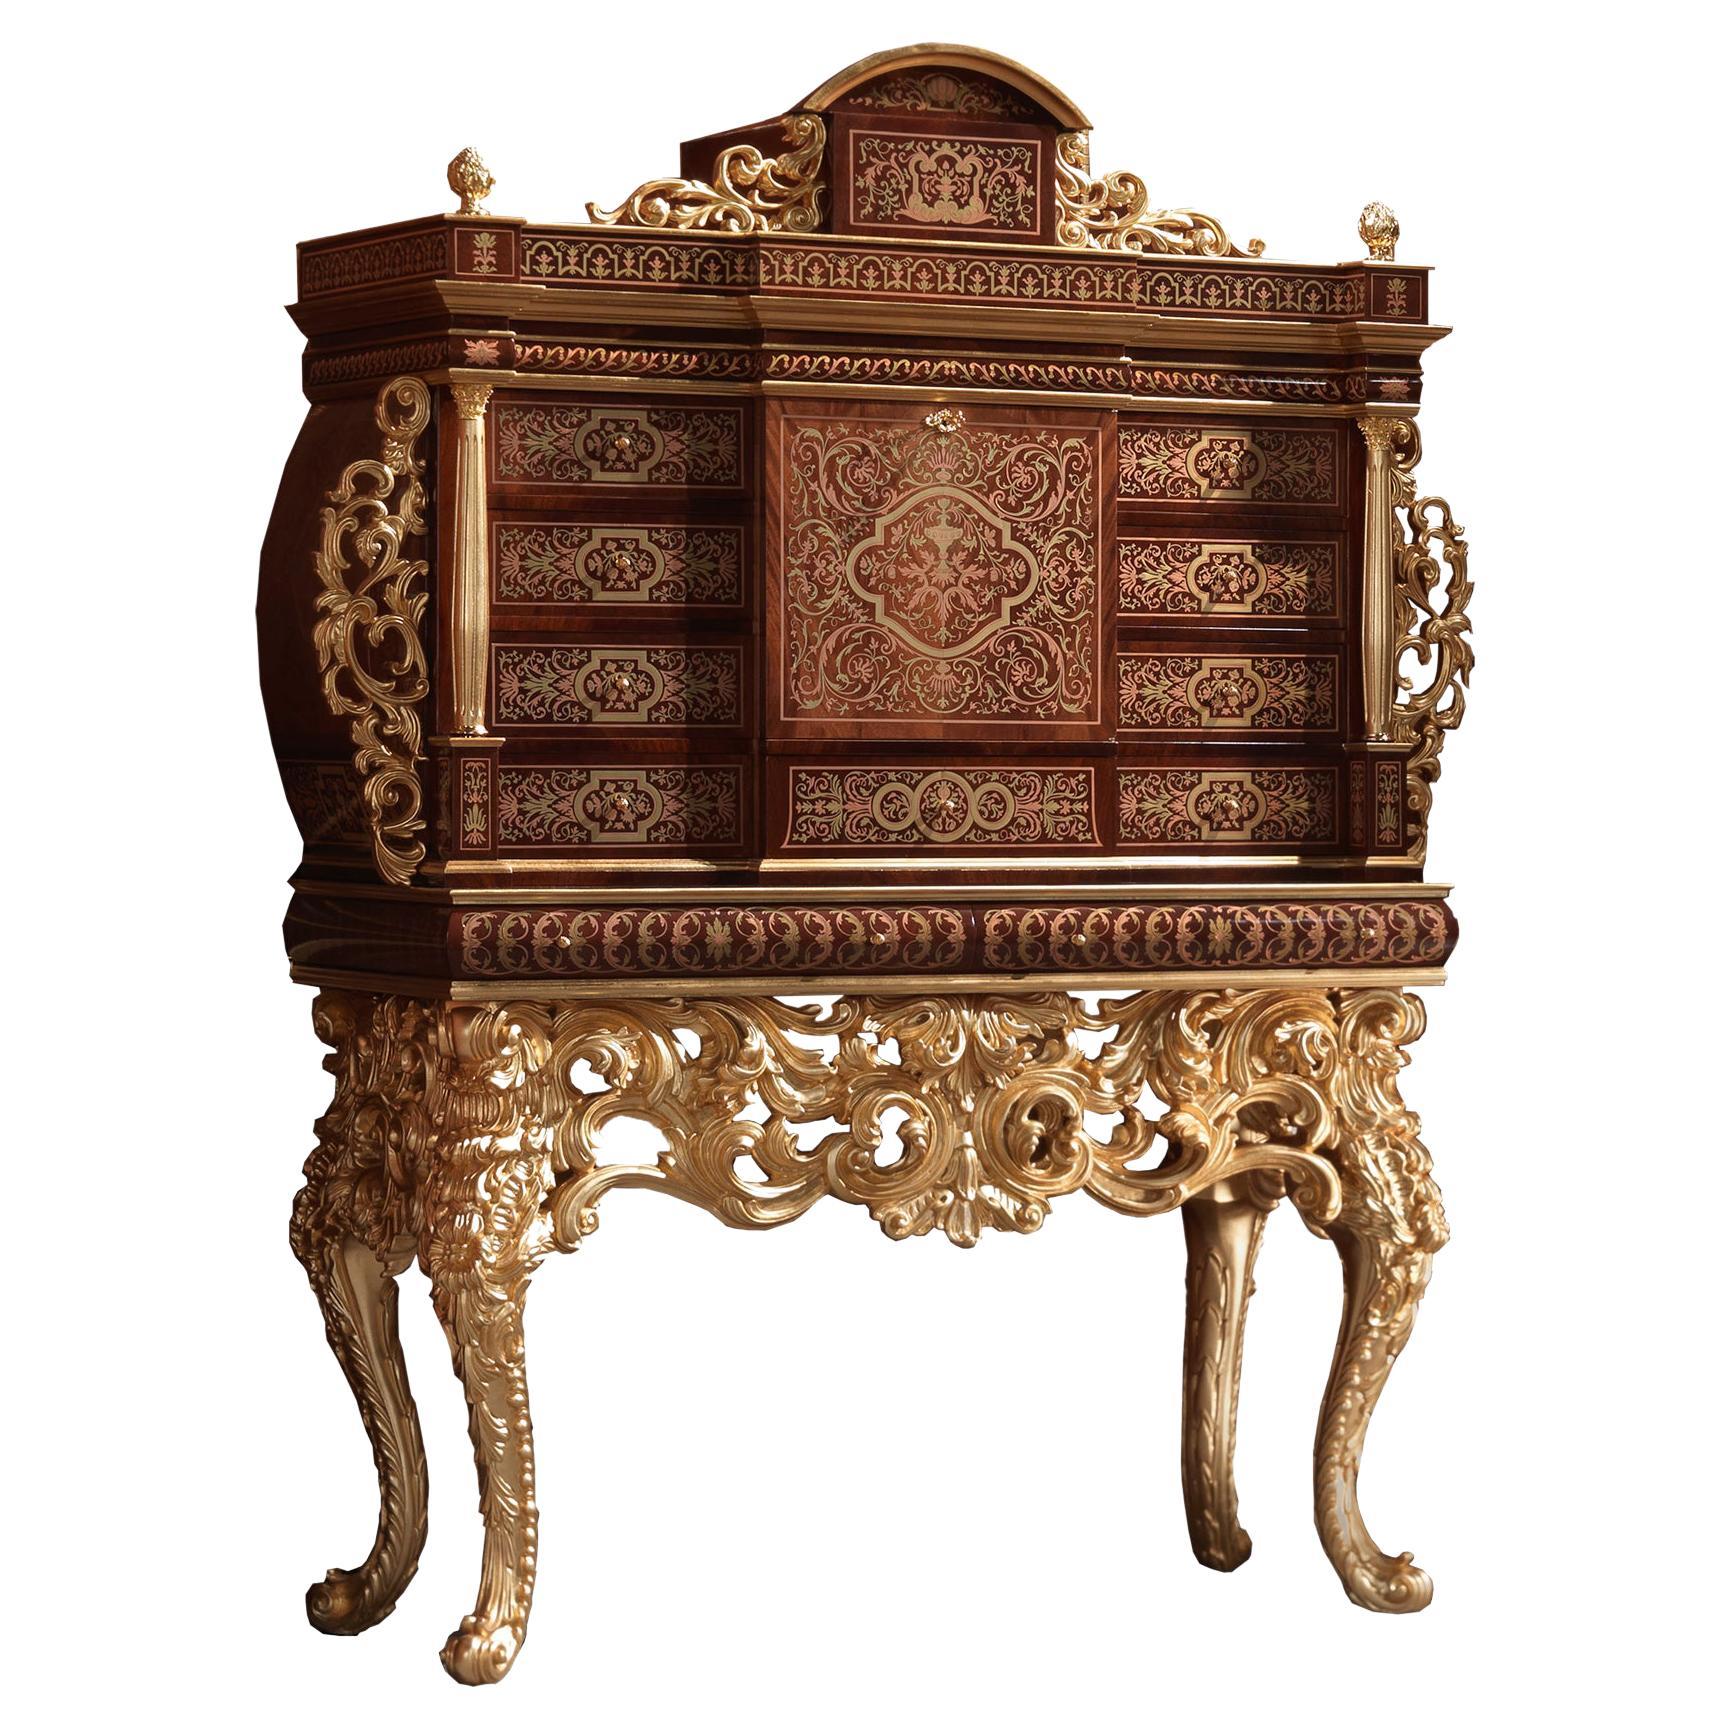 21st Century Wooden Cigar Cabinet with Baroque Carvings, Handpainted, Gold Leaf